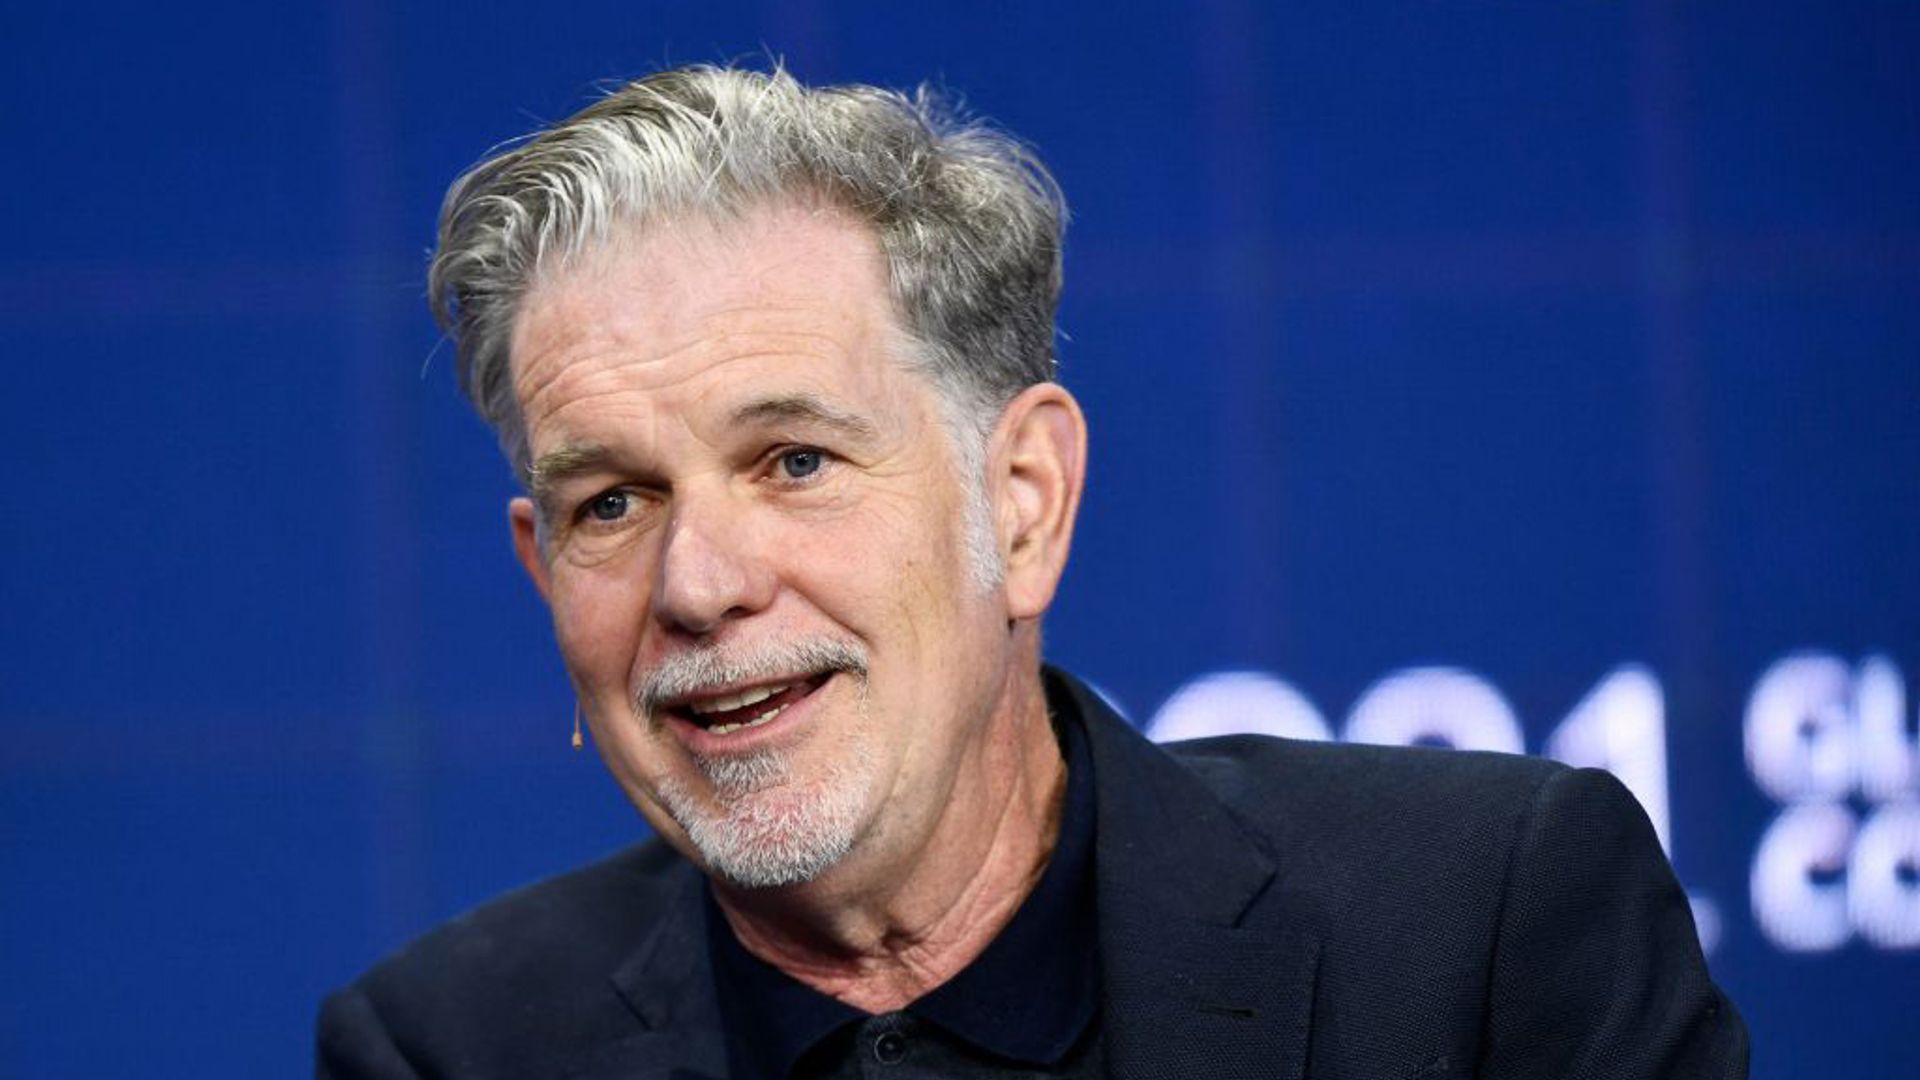 Reed Hastings wearing a navy suit 